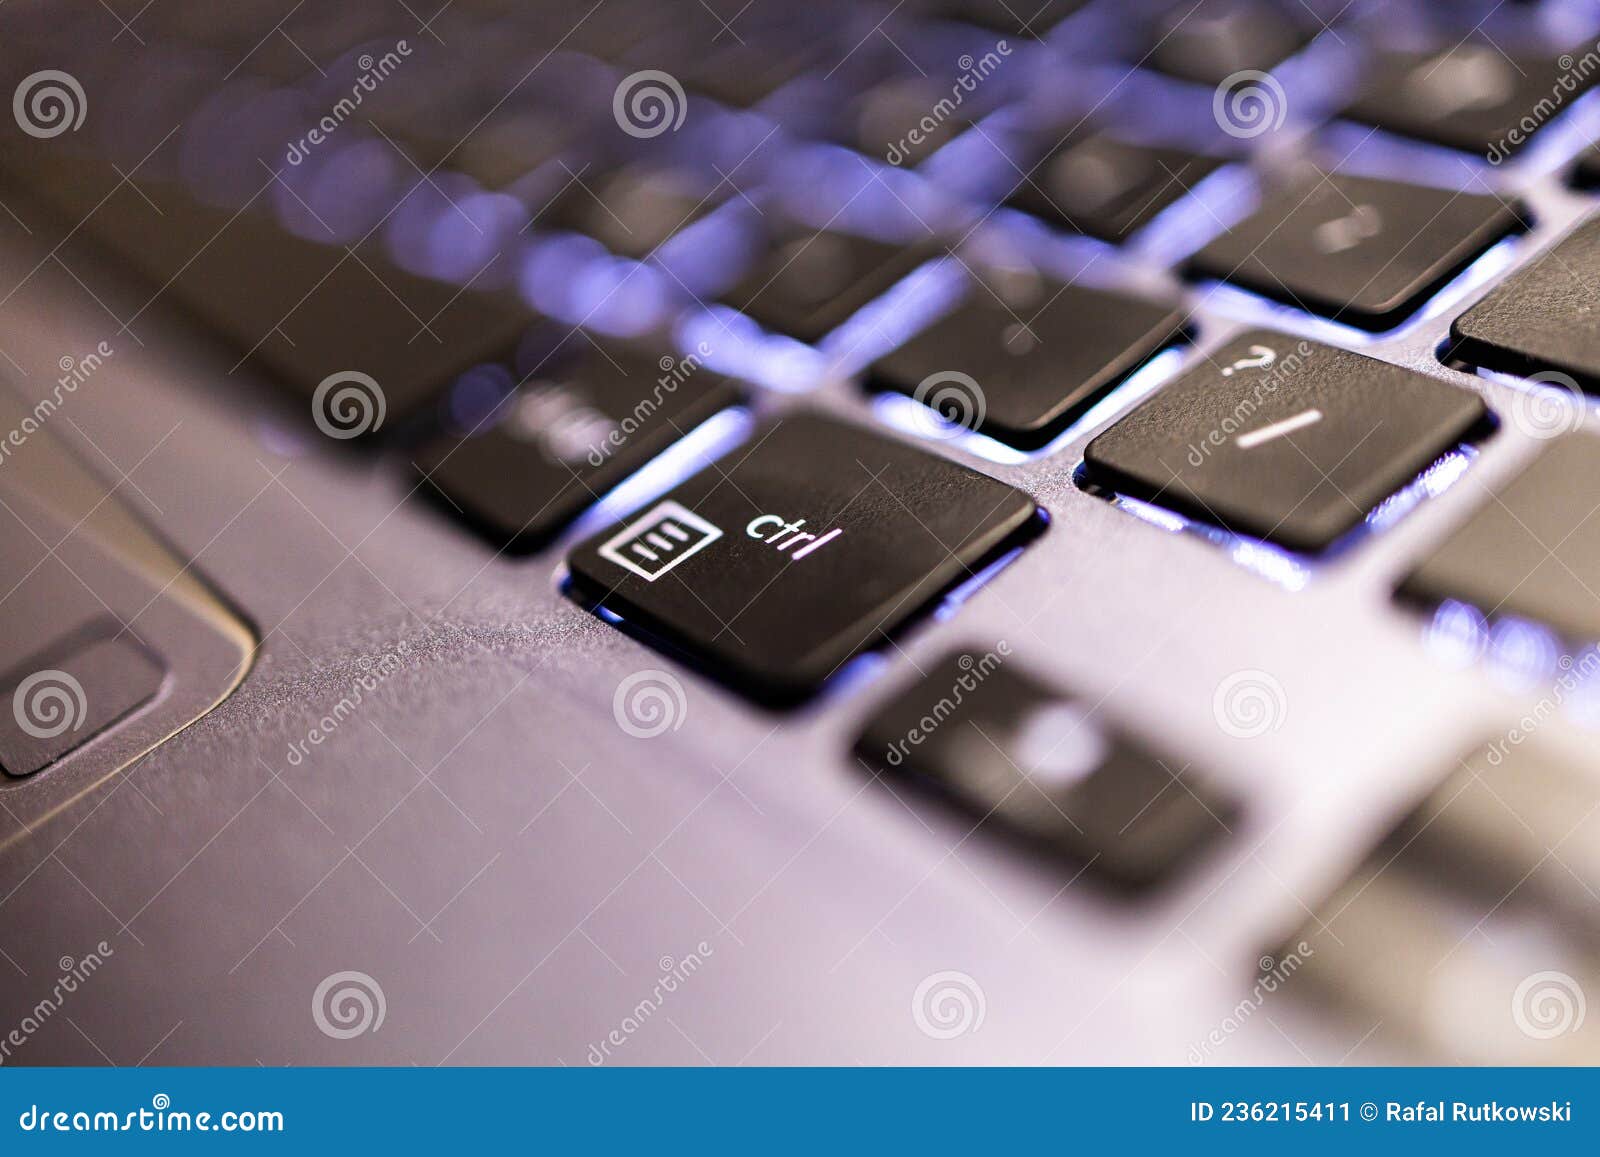 Control Button on the Keyboard with Light. Close Up, Macro Stock Image